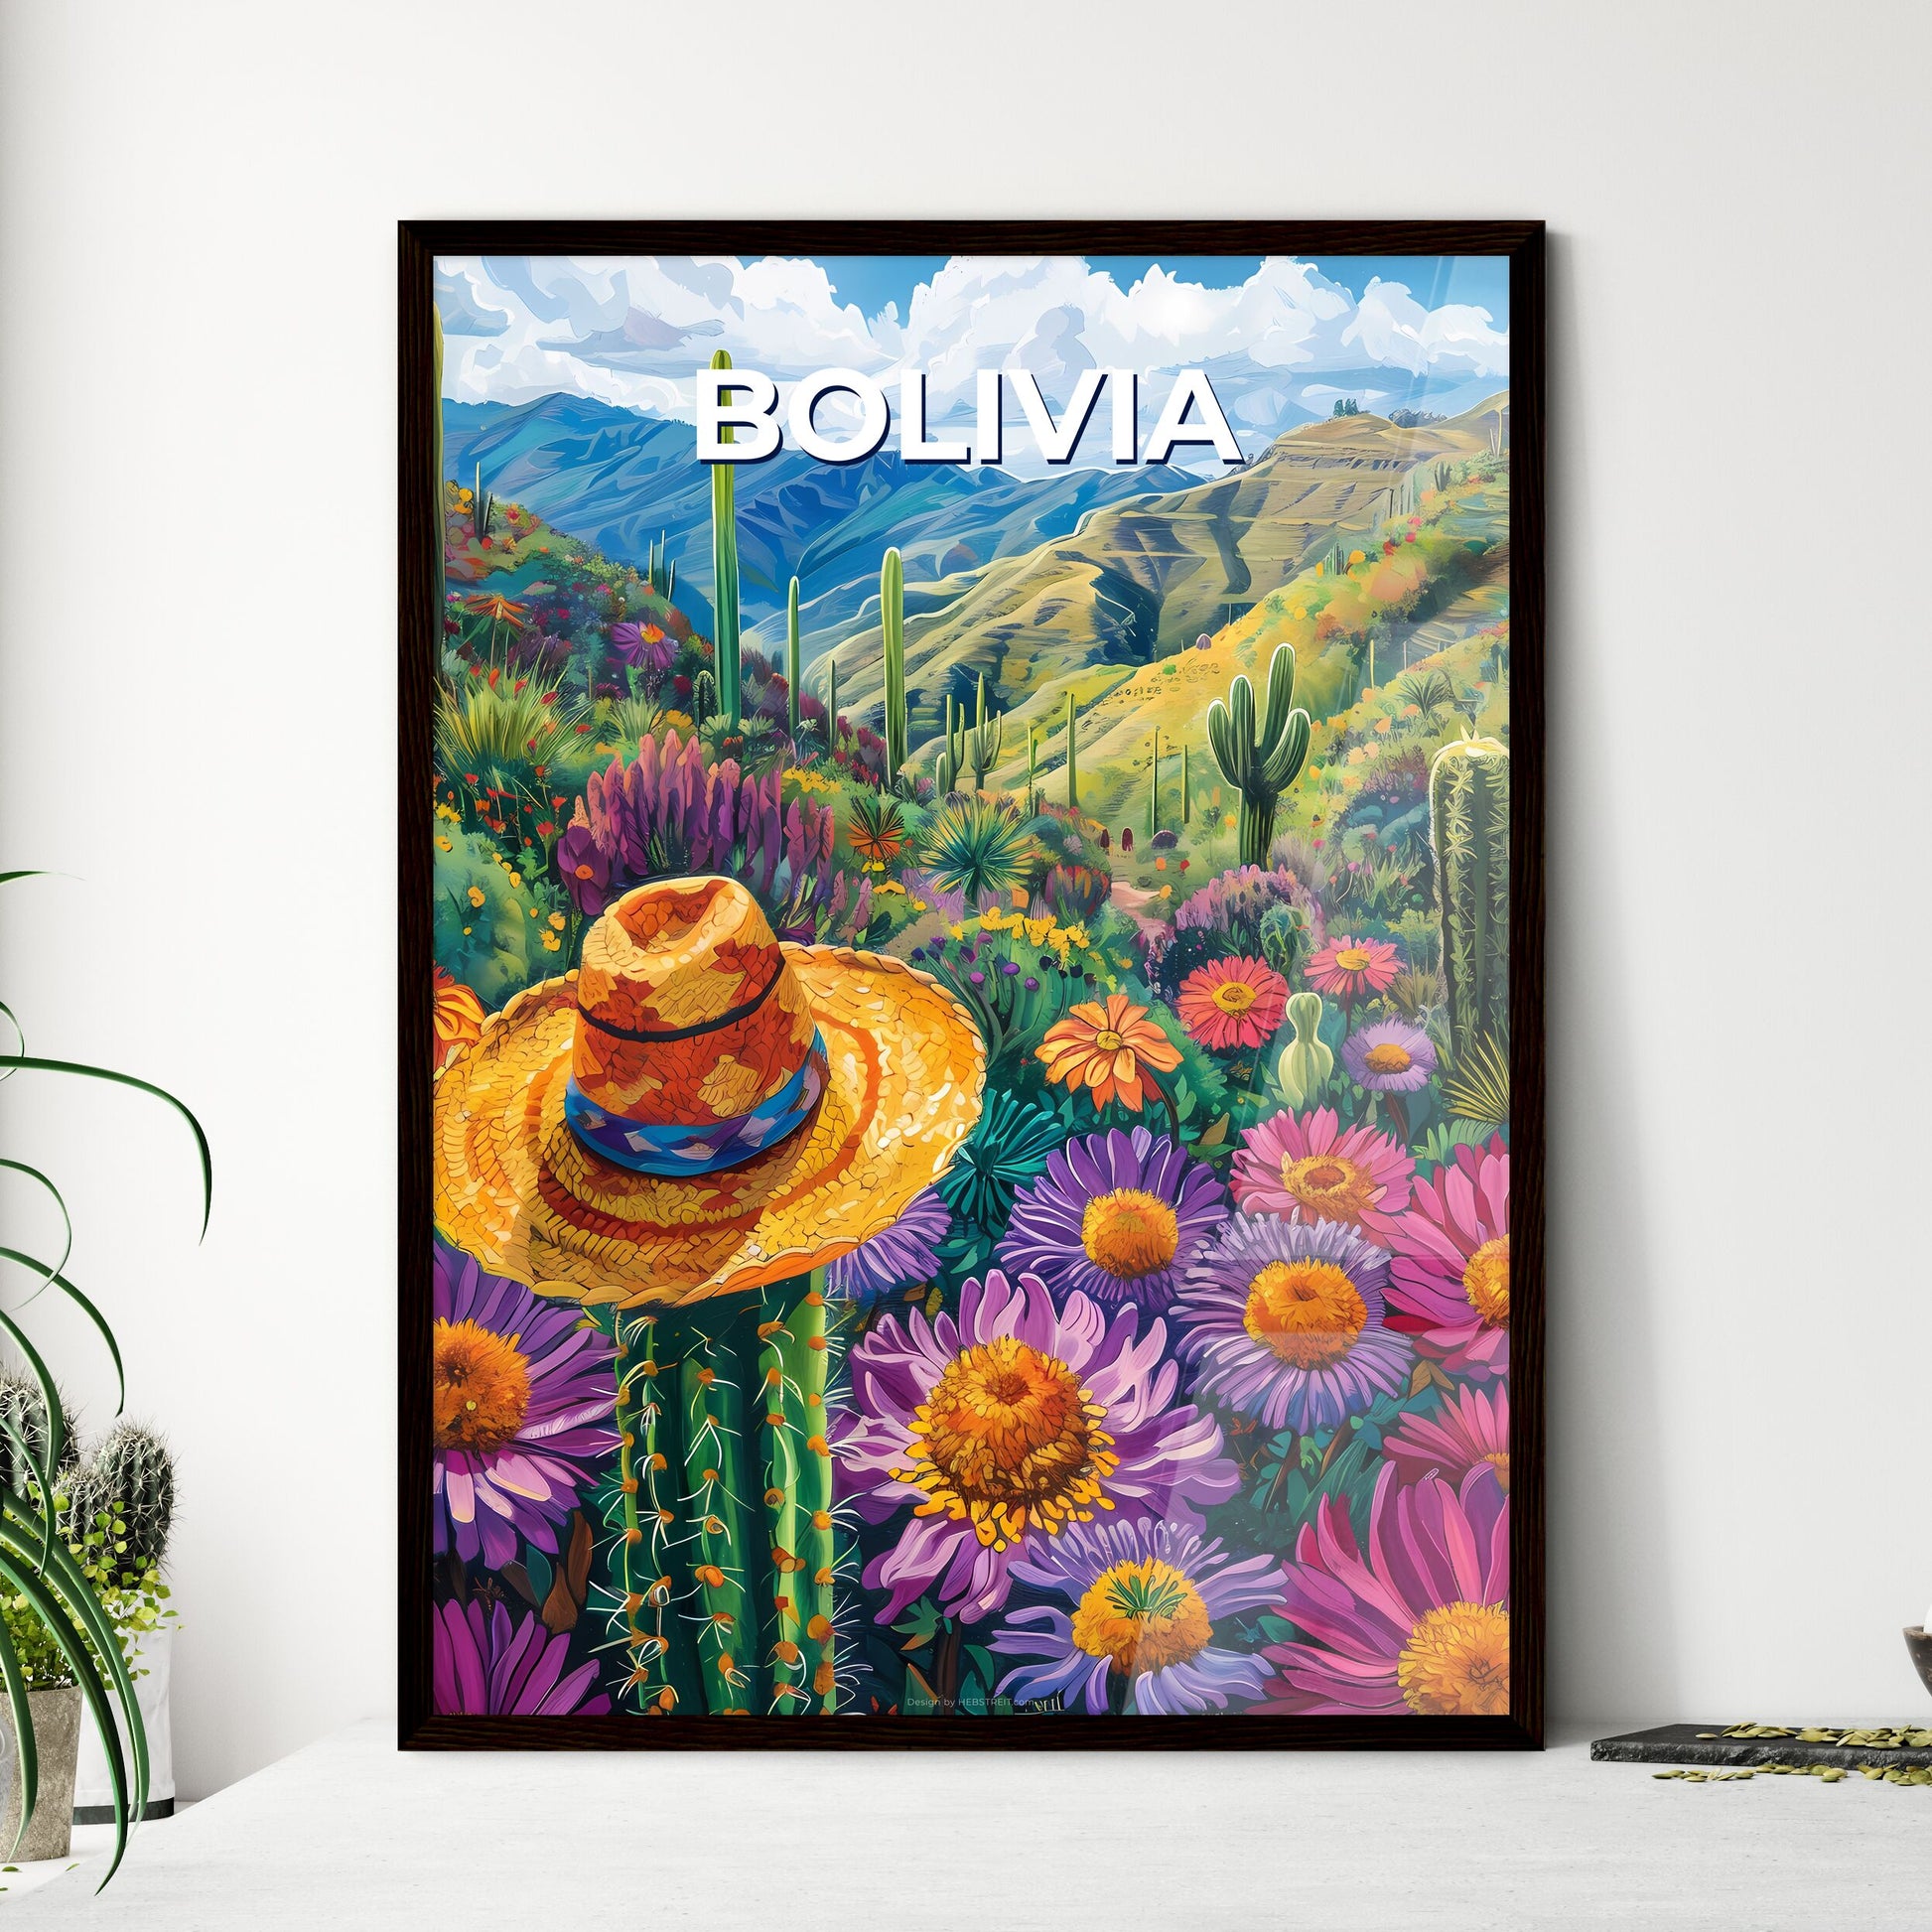 Painting of Vibrant Cactus and Flowers, Bolivia